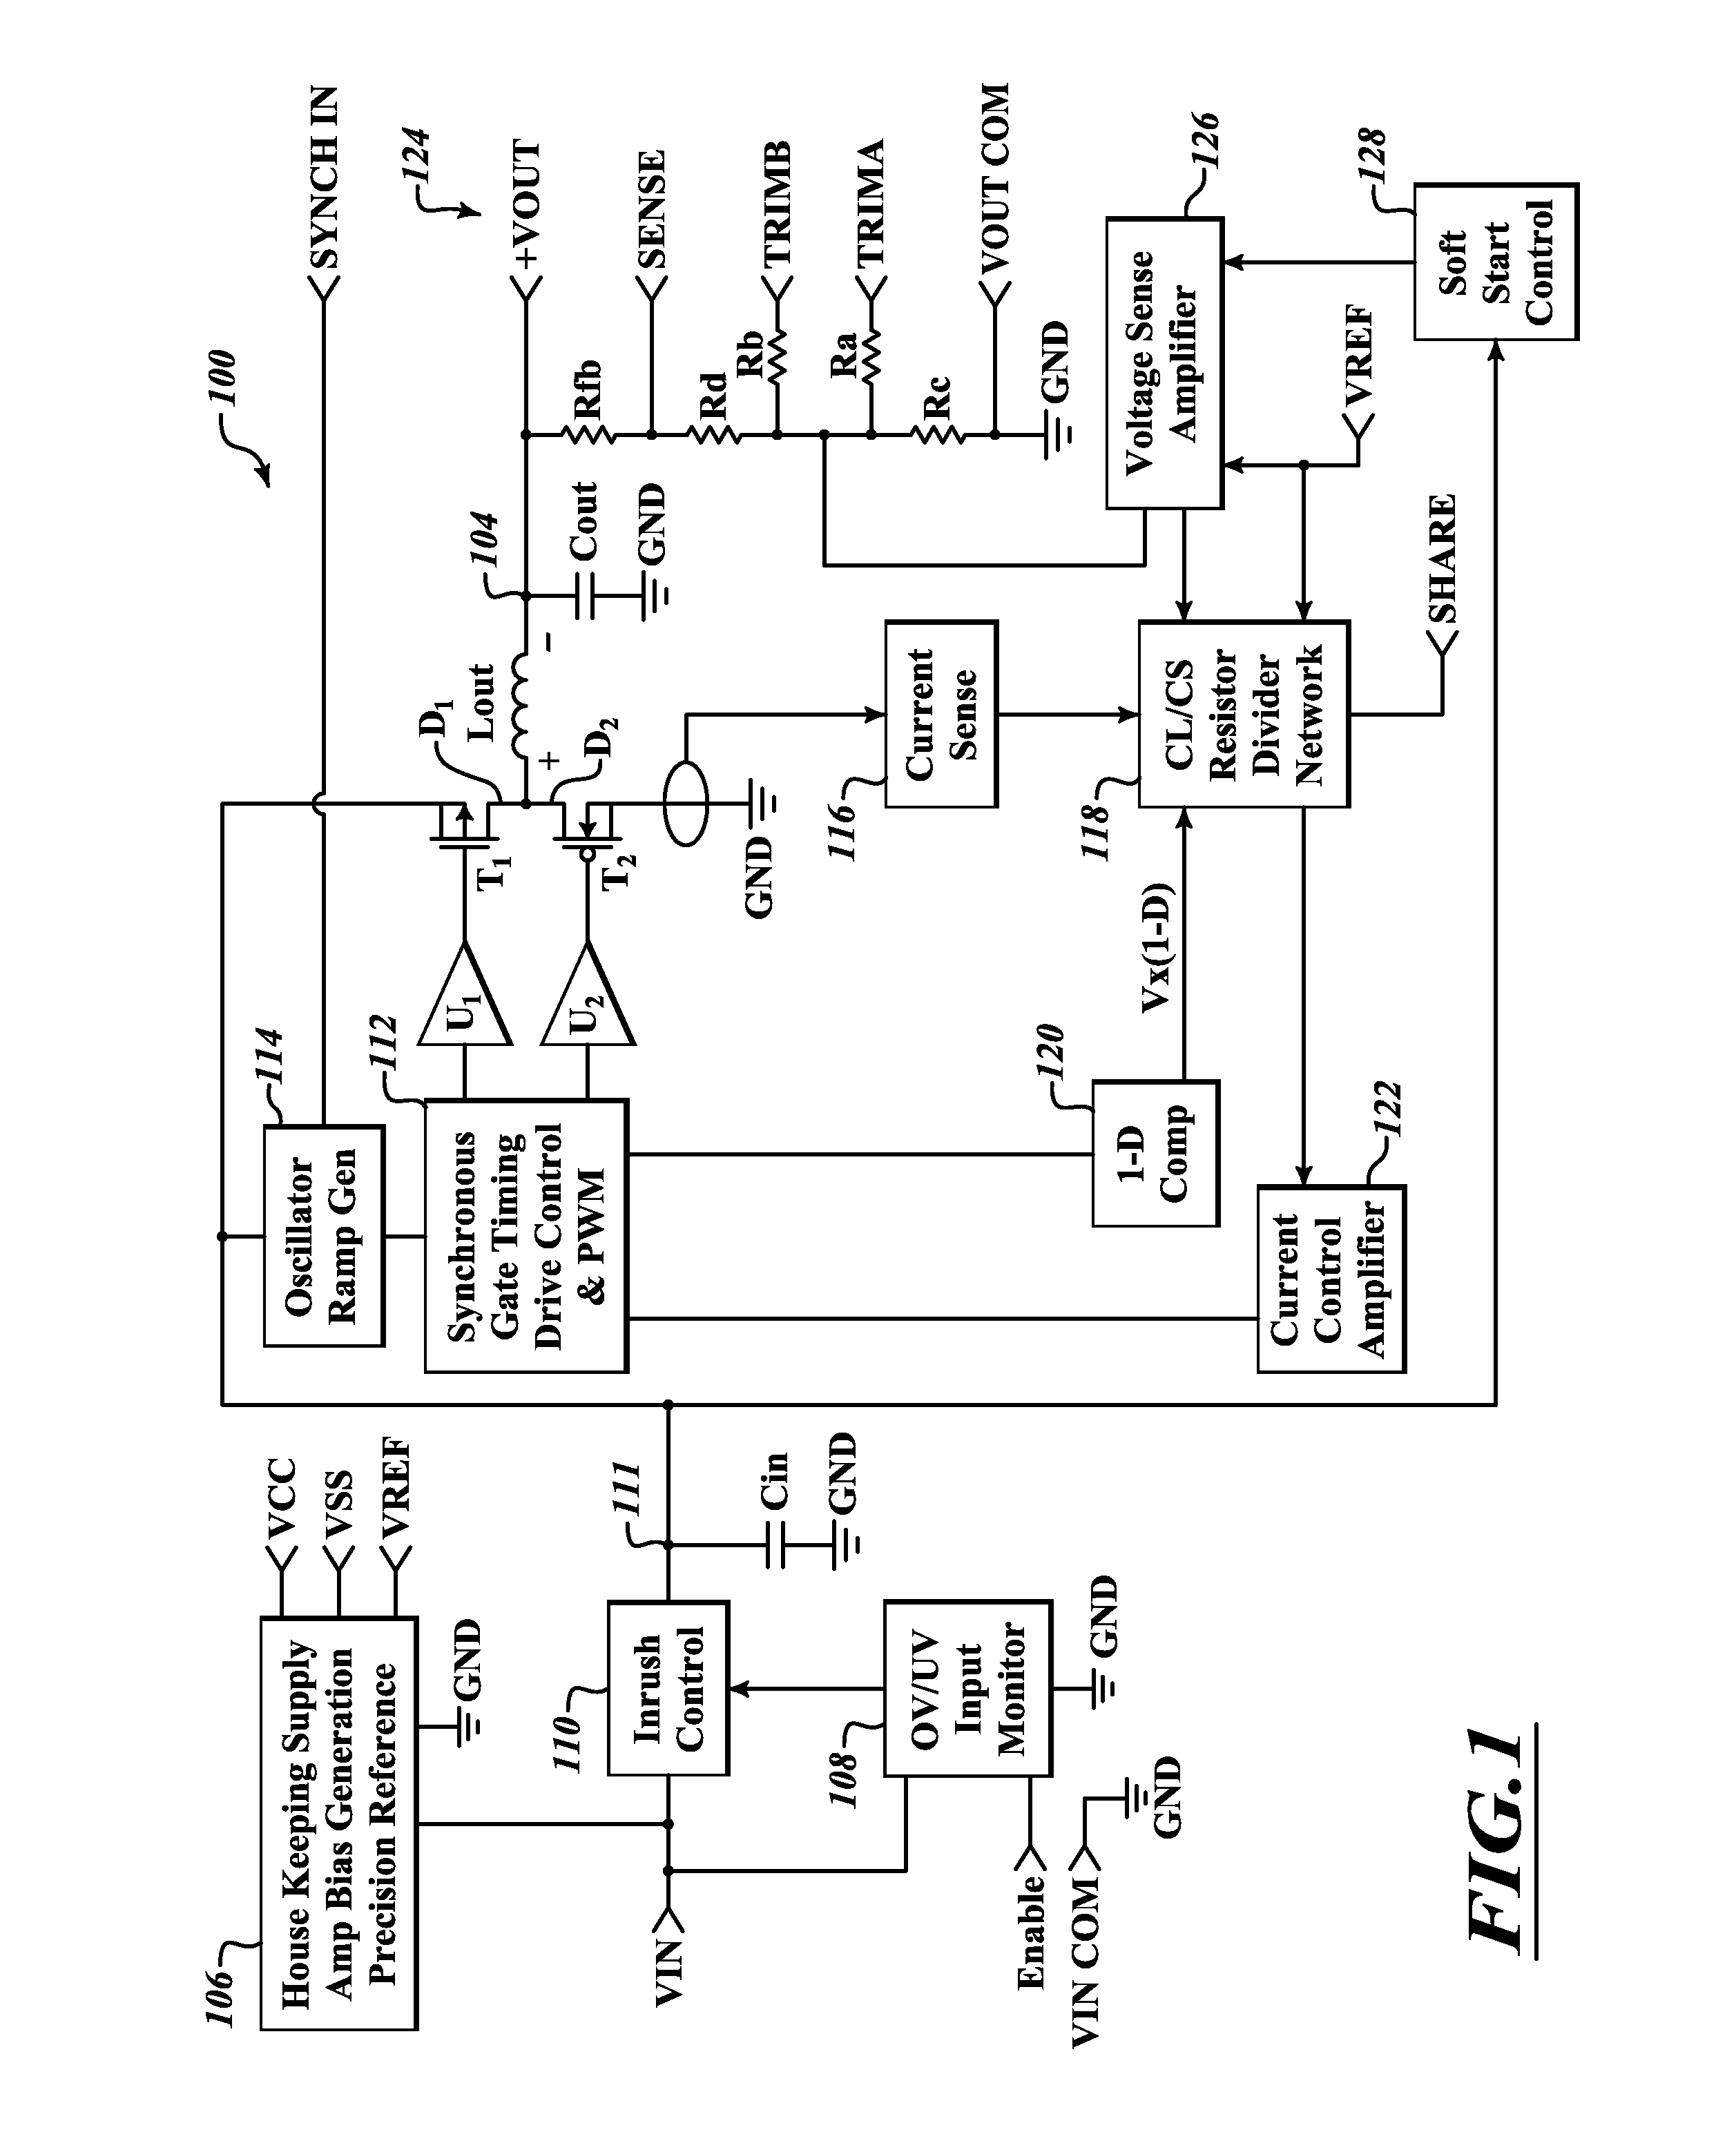 Power converter apparatus and method with output current sensing and compensation for current limit/current share operation